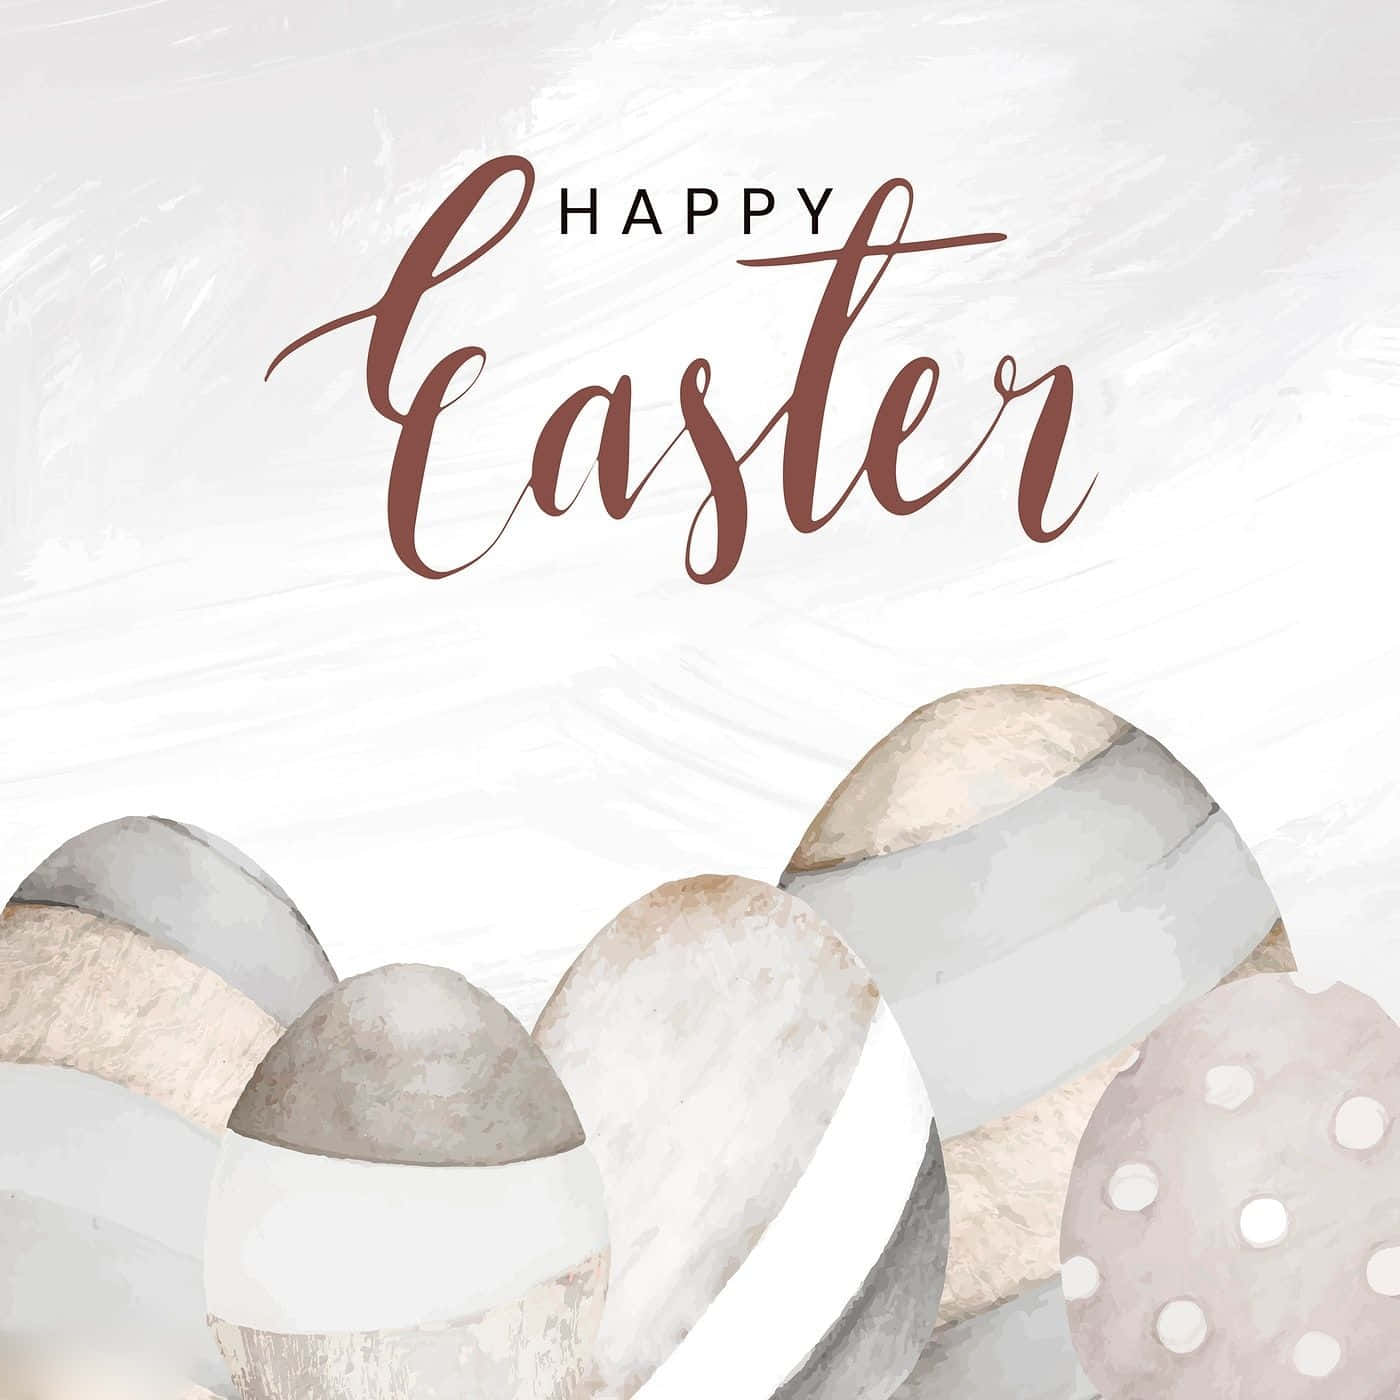 Spread the Joy with a Happy Easter